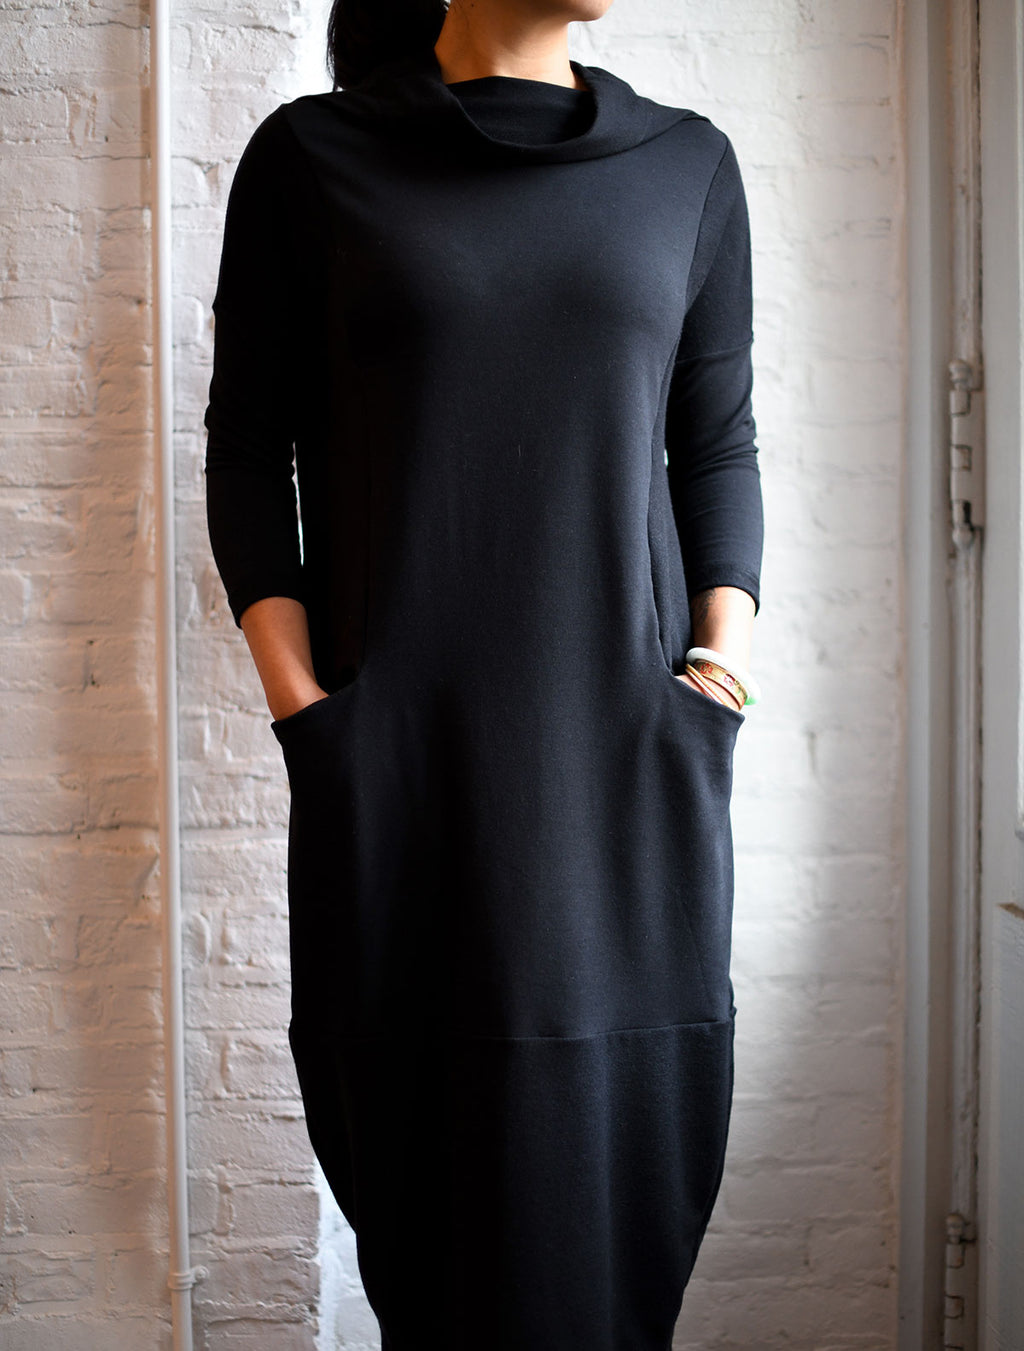 Front view of woman modeling the black funnel neckline cocoon dress with pockets